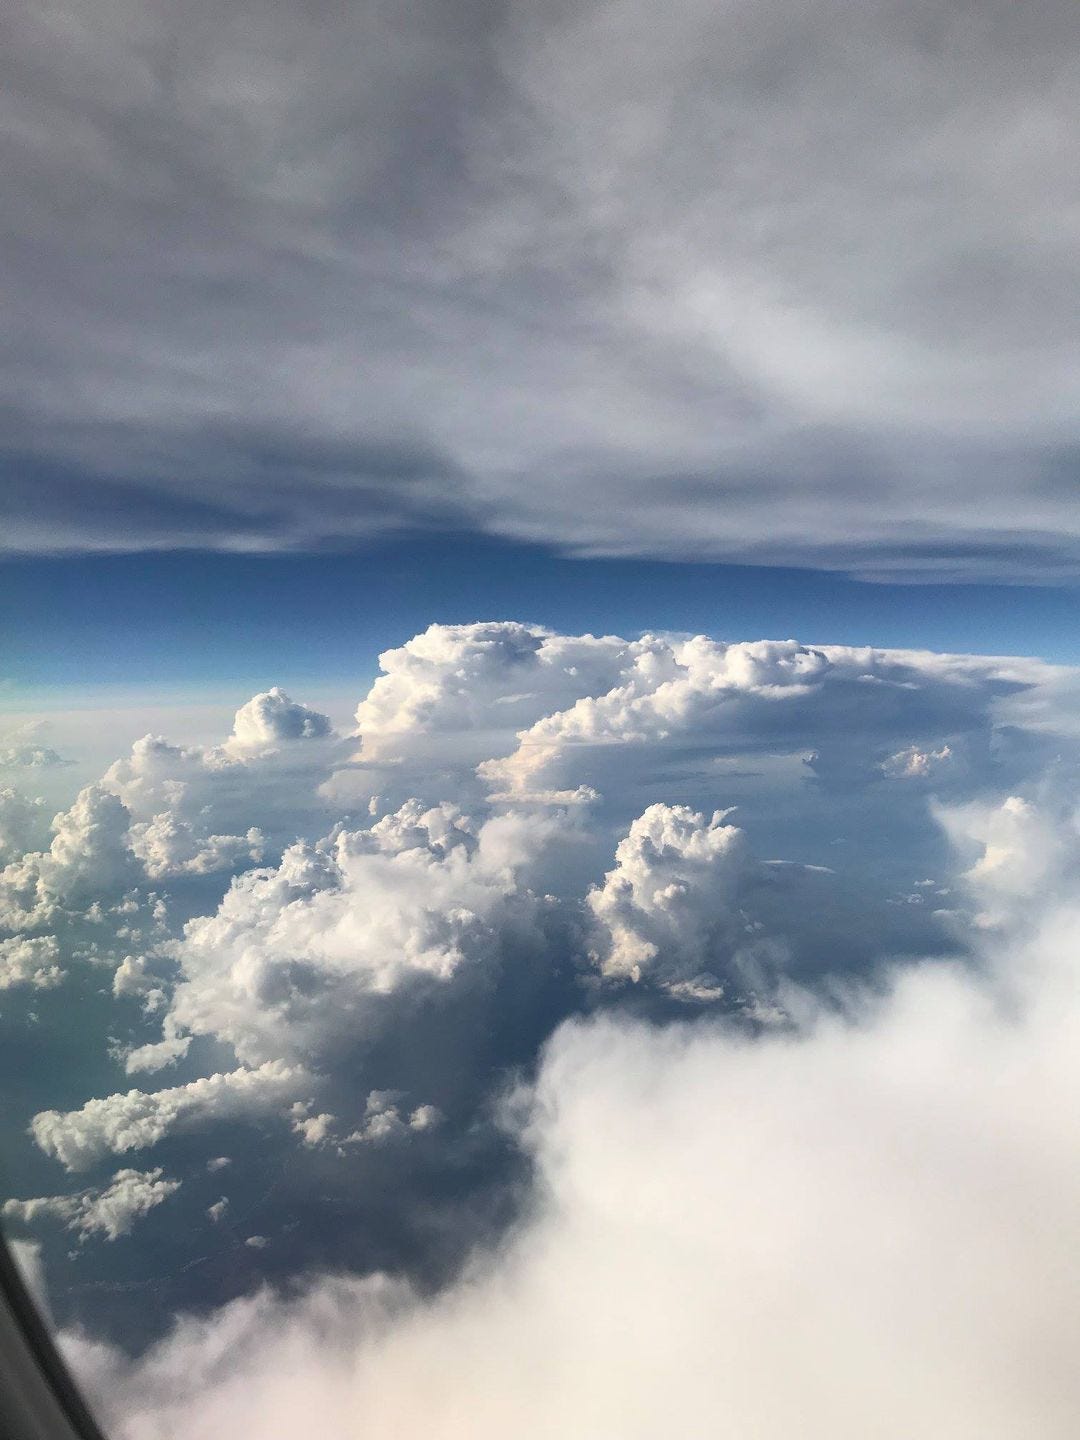 billowing white clouds and blue sky, from the window of an airplane